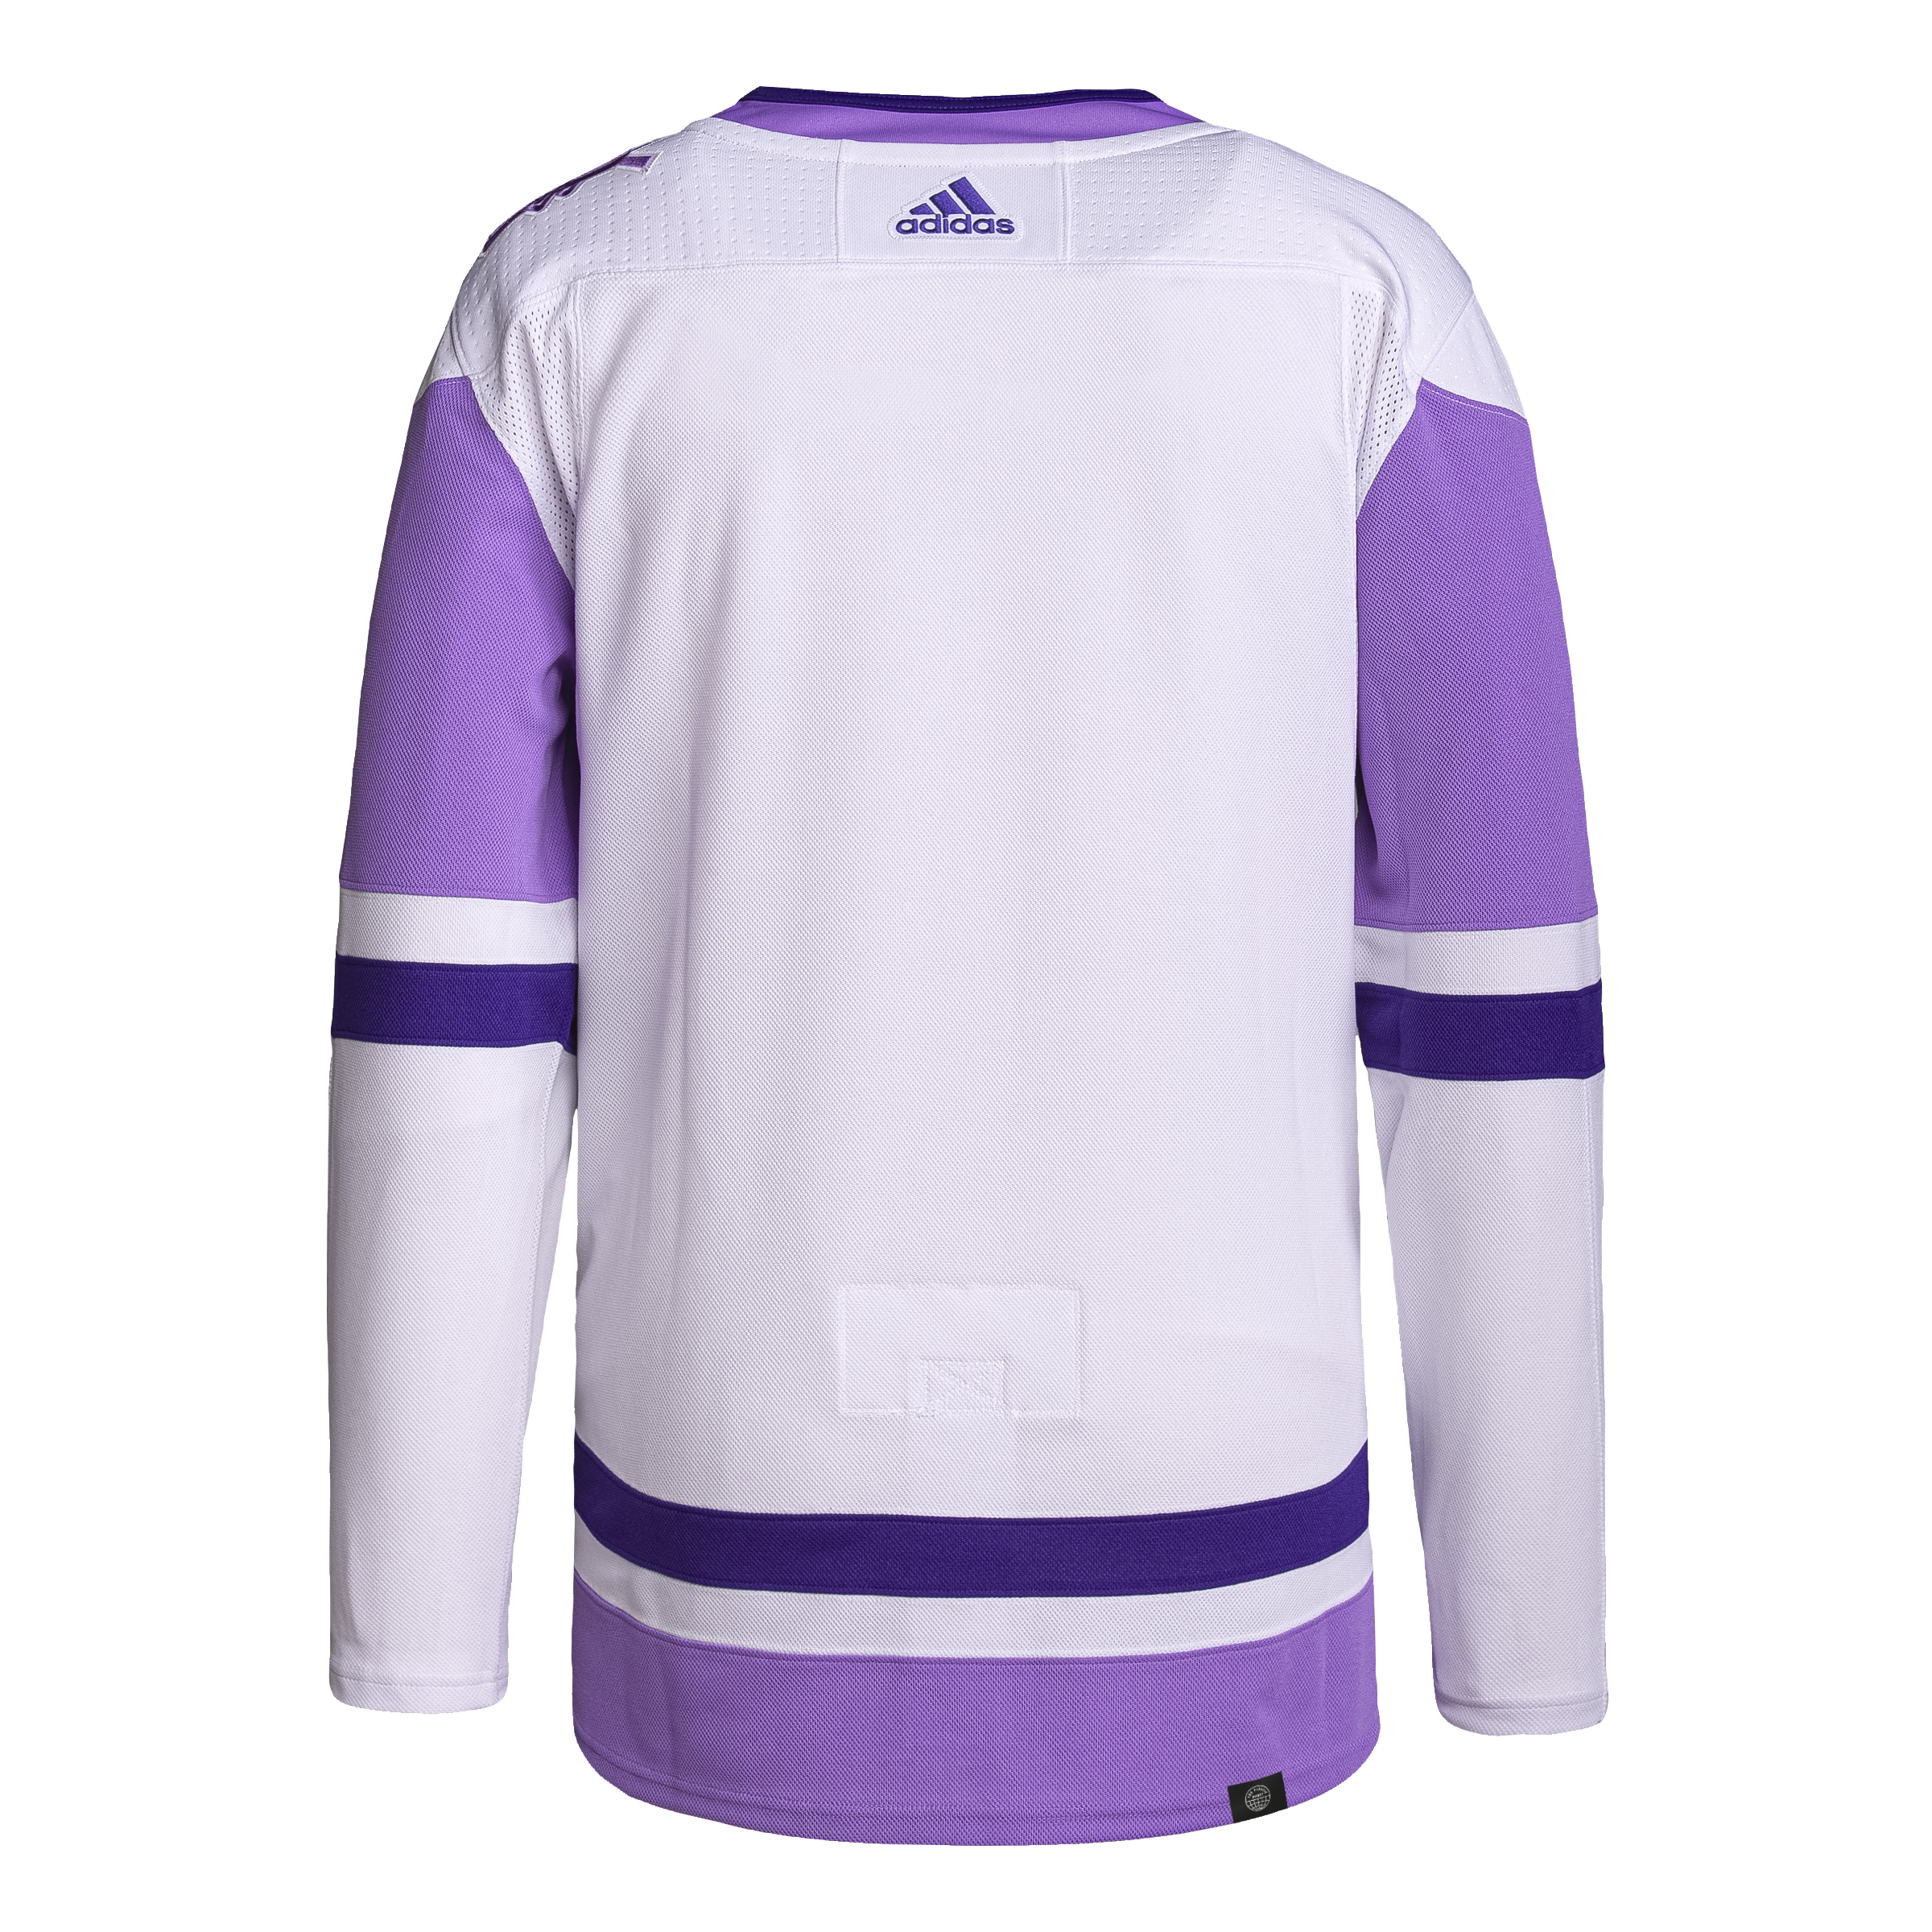 Maple Leafs Adidas Men's Hockey Fights Cancer Authentic Practice Jersey